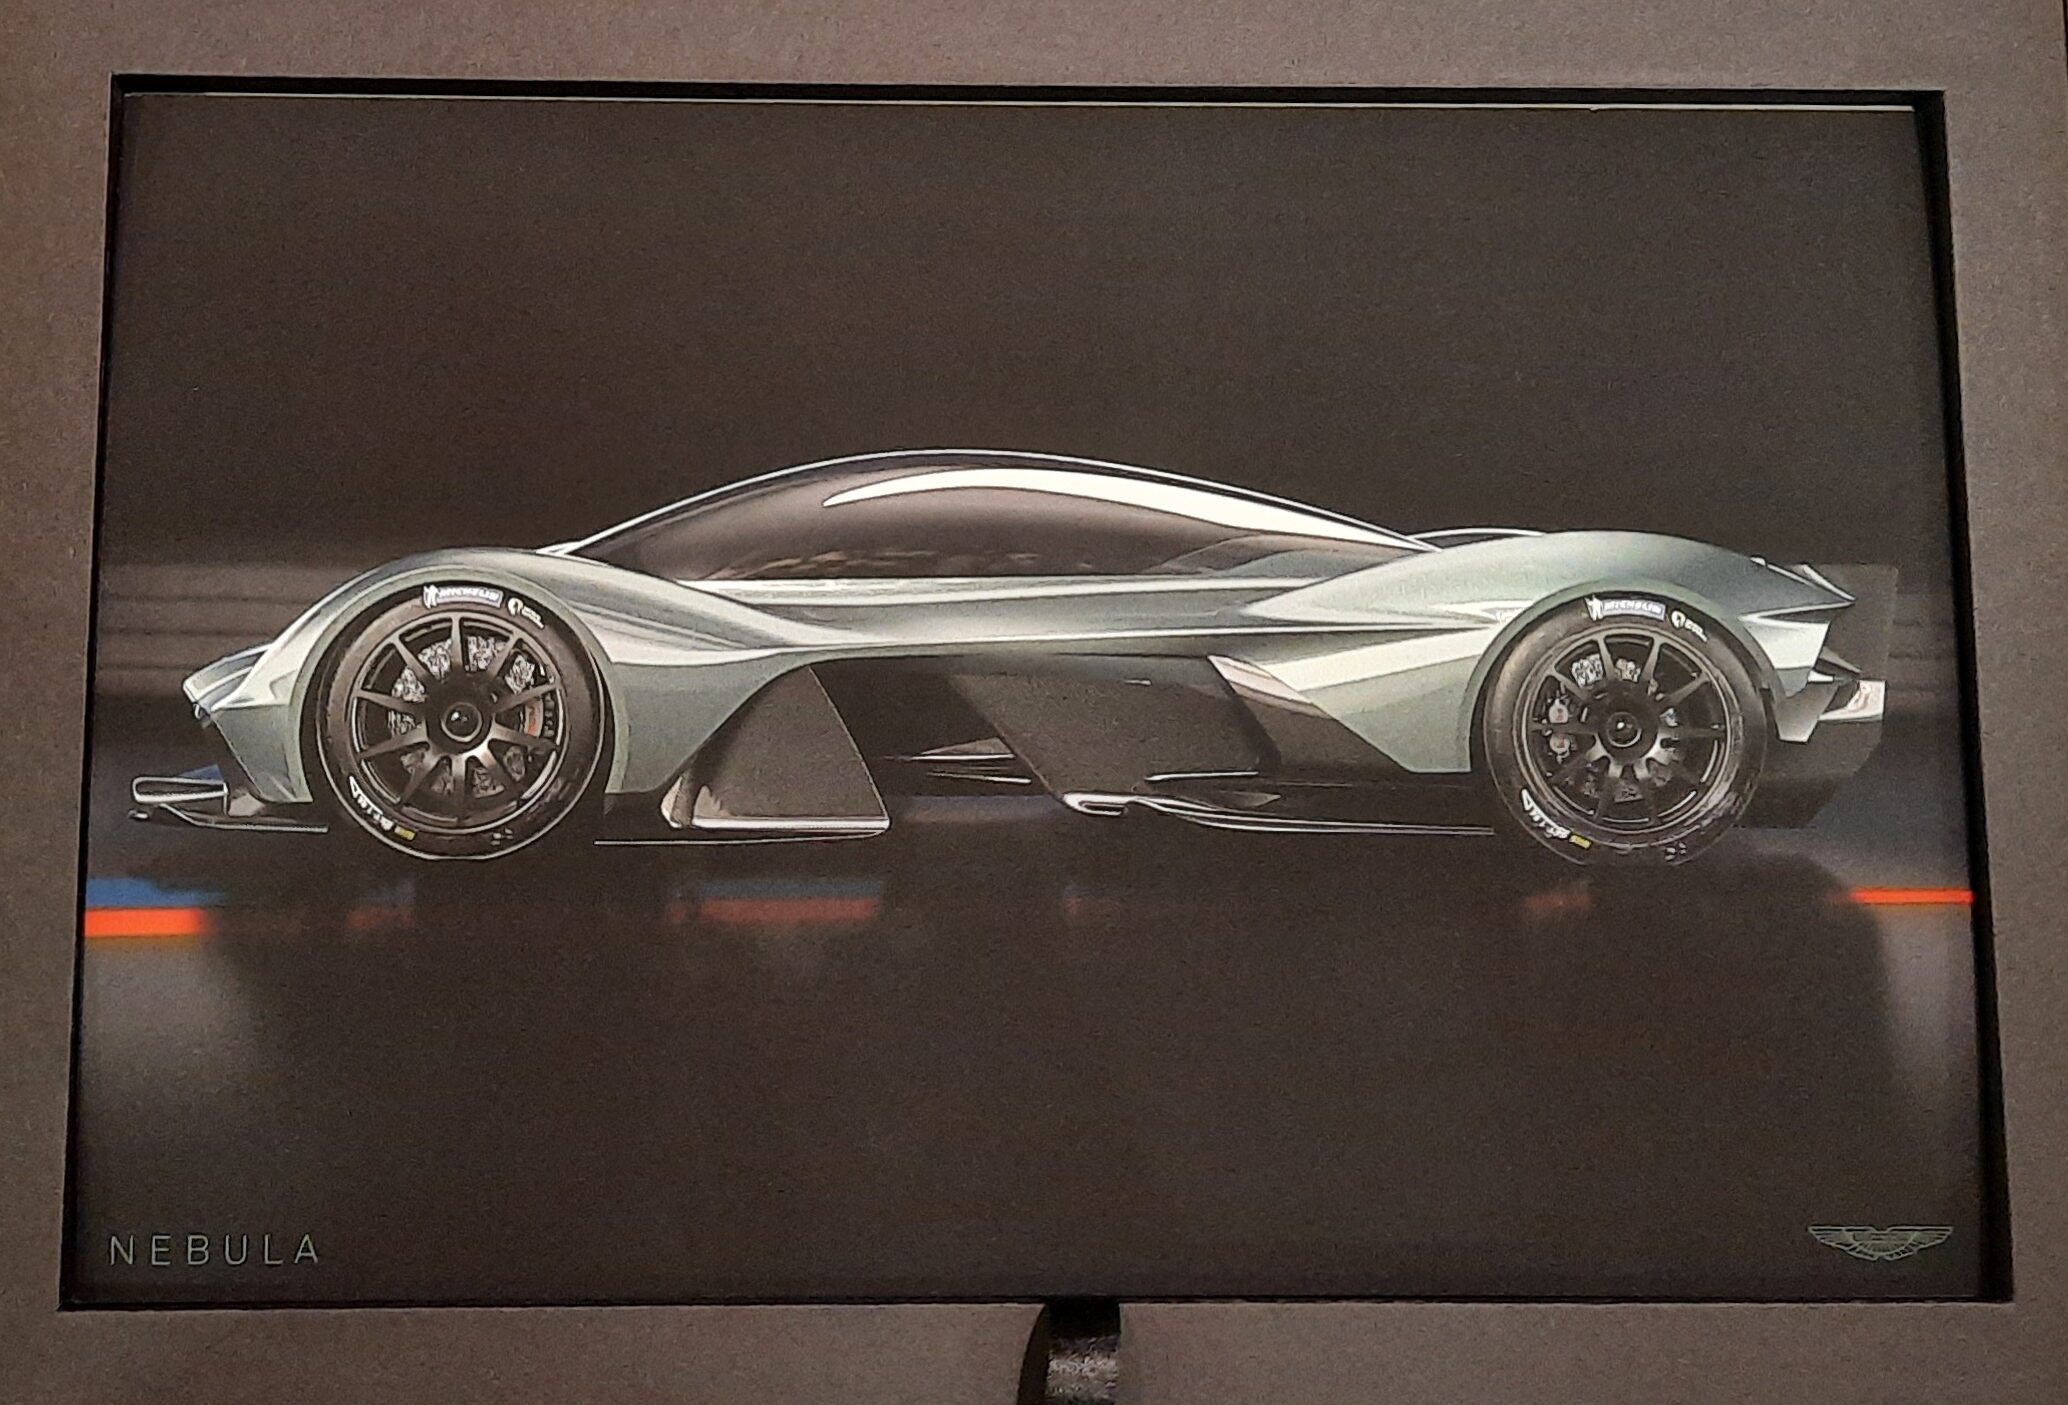 A card from the Nebula Collaboration Presentation Box showing a drawing of the side view of the car. It is a grey colour against a black background with highlights of orange and blue beneath the car